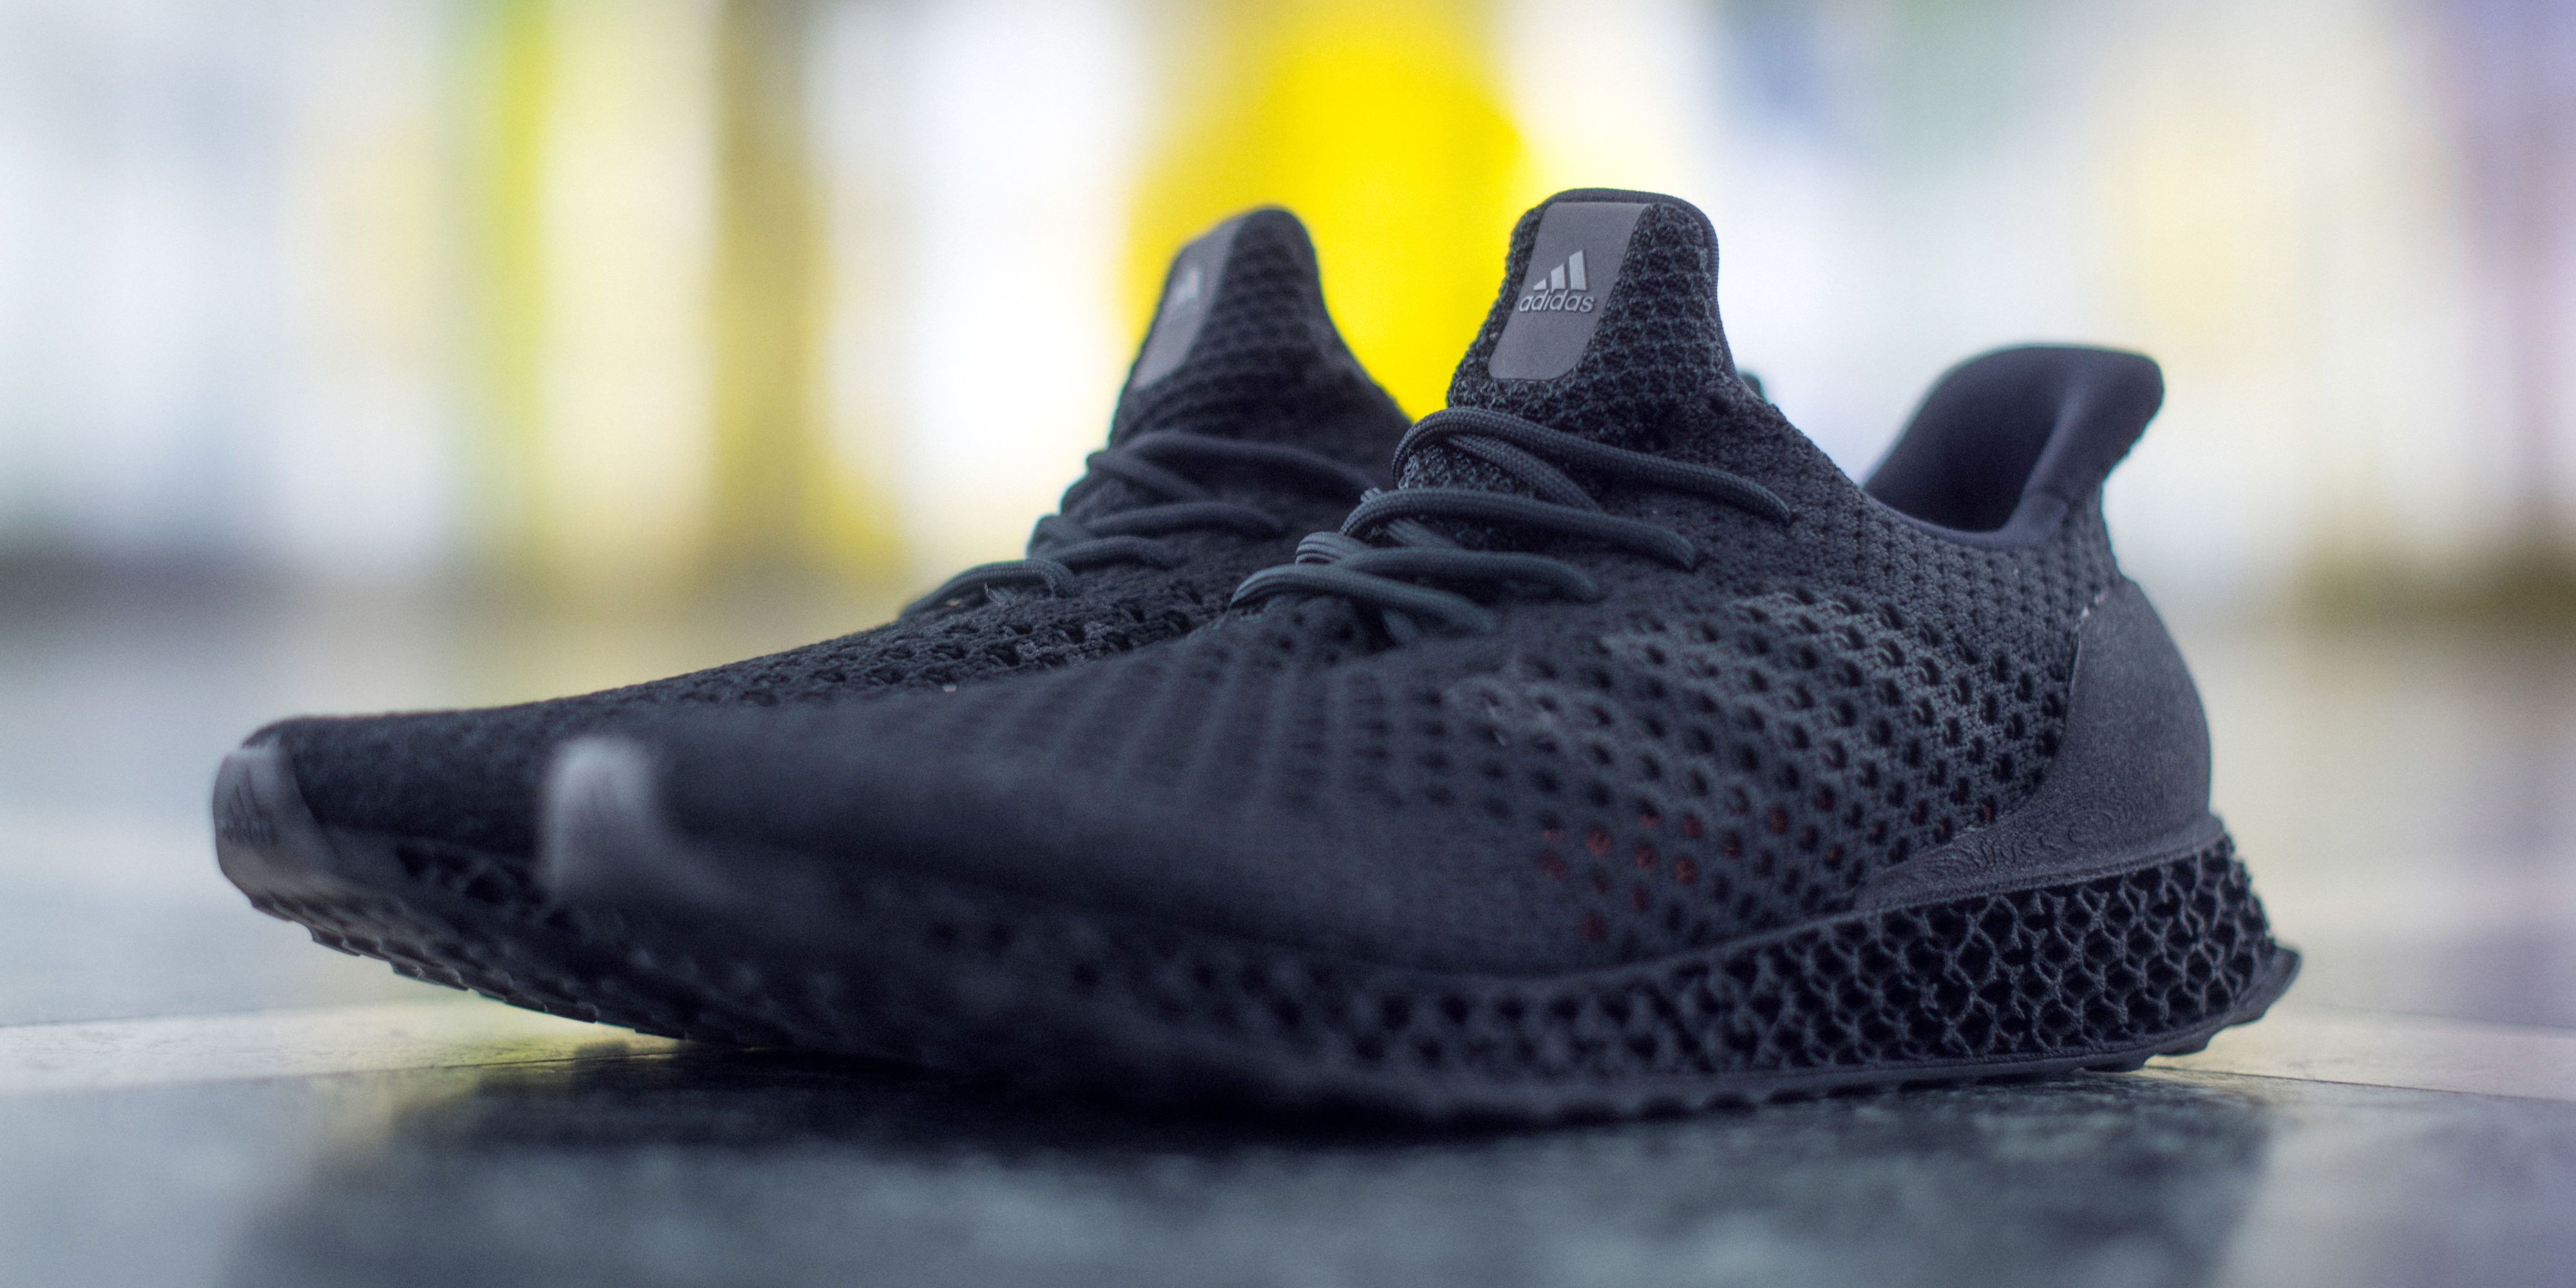 Where to Buy Adidas' New 3D Runner - Adidas Is Releasing a 3D-Printed  Sneaker